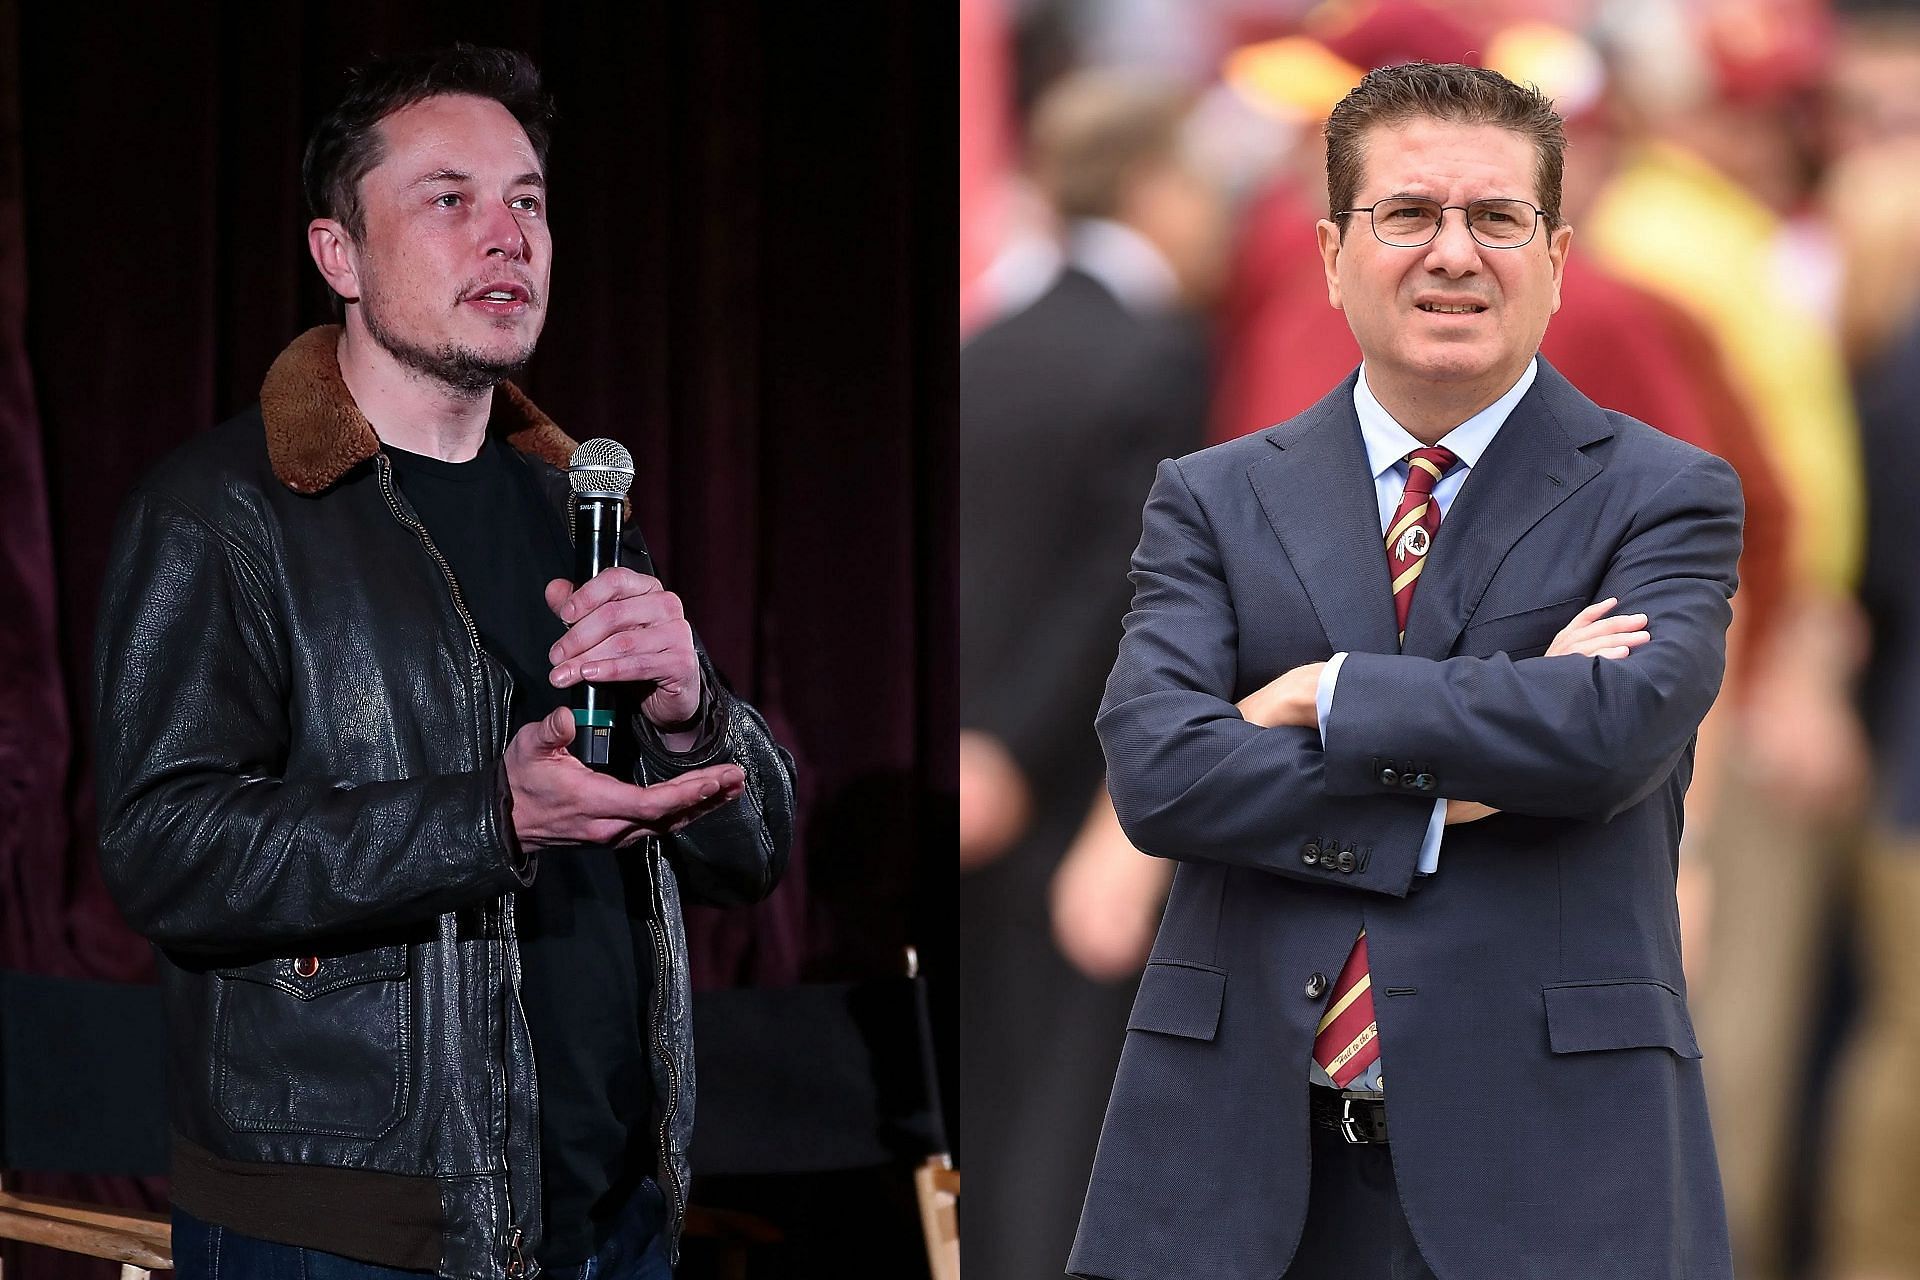 Dan Snyder catches strays as NFL fans blast Elon Musk over Twitter rate limit